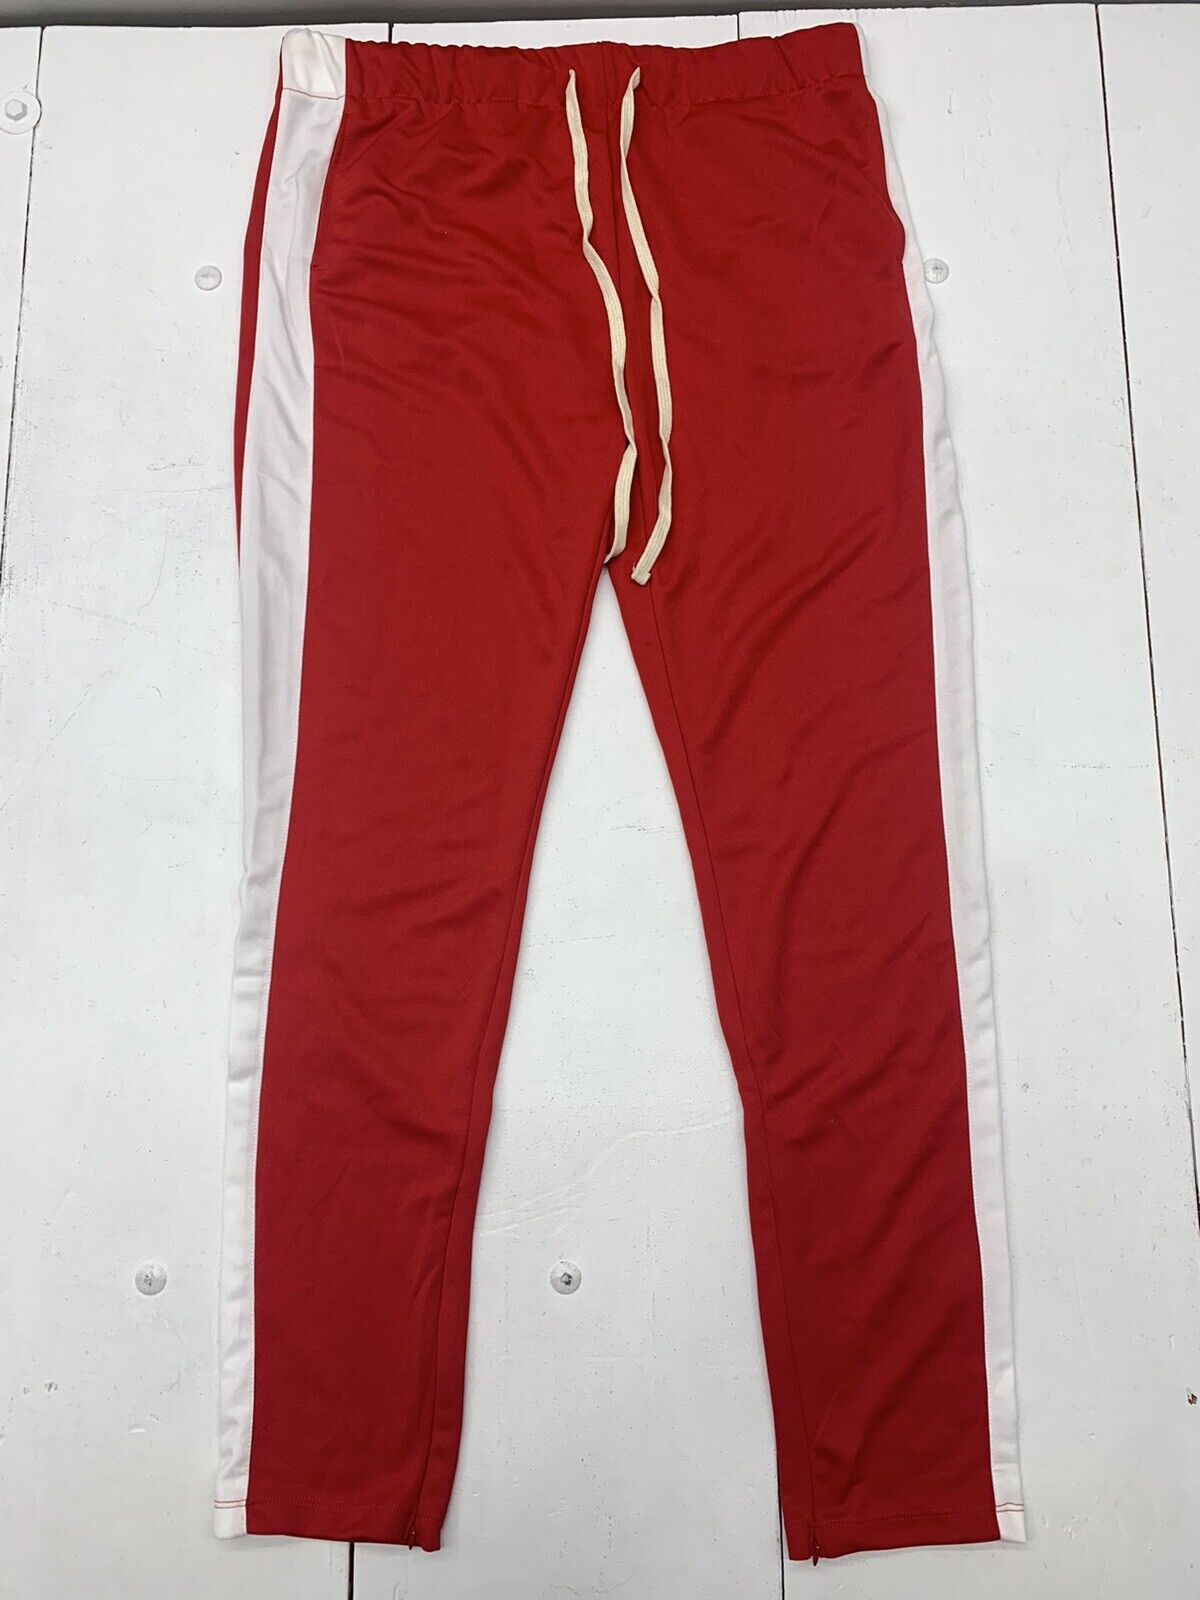 G FASHION Men Stylish Track Pants, Age: 15-42, Size: M/L/Xl at Rs 175/piece  in North 24 Parganas